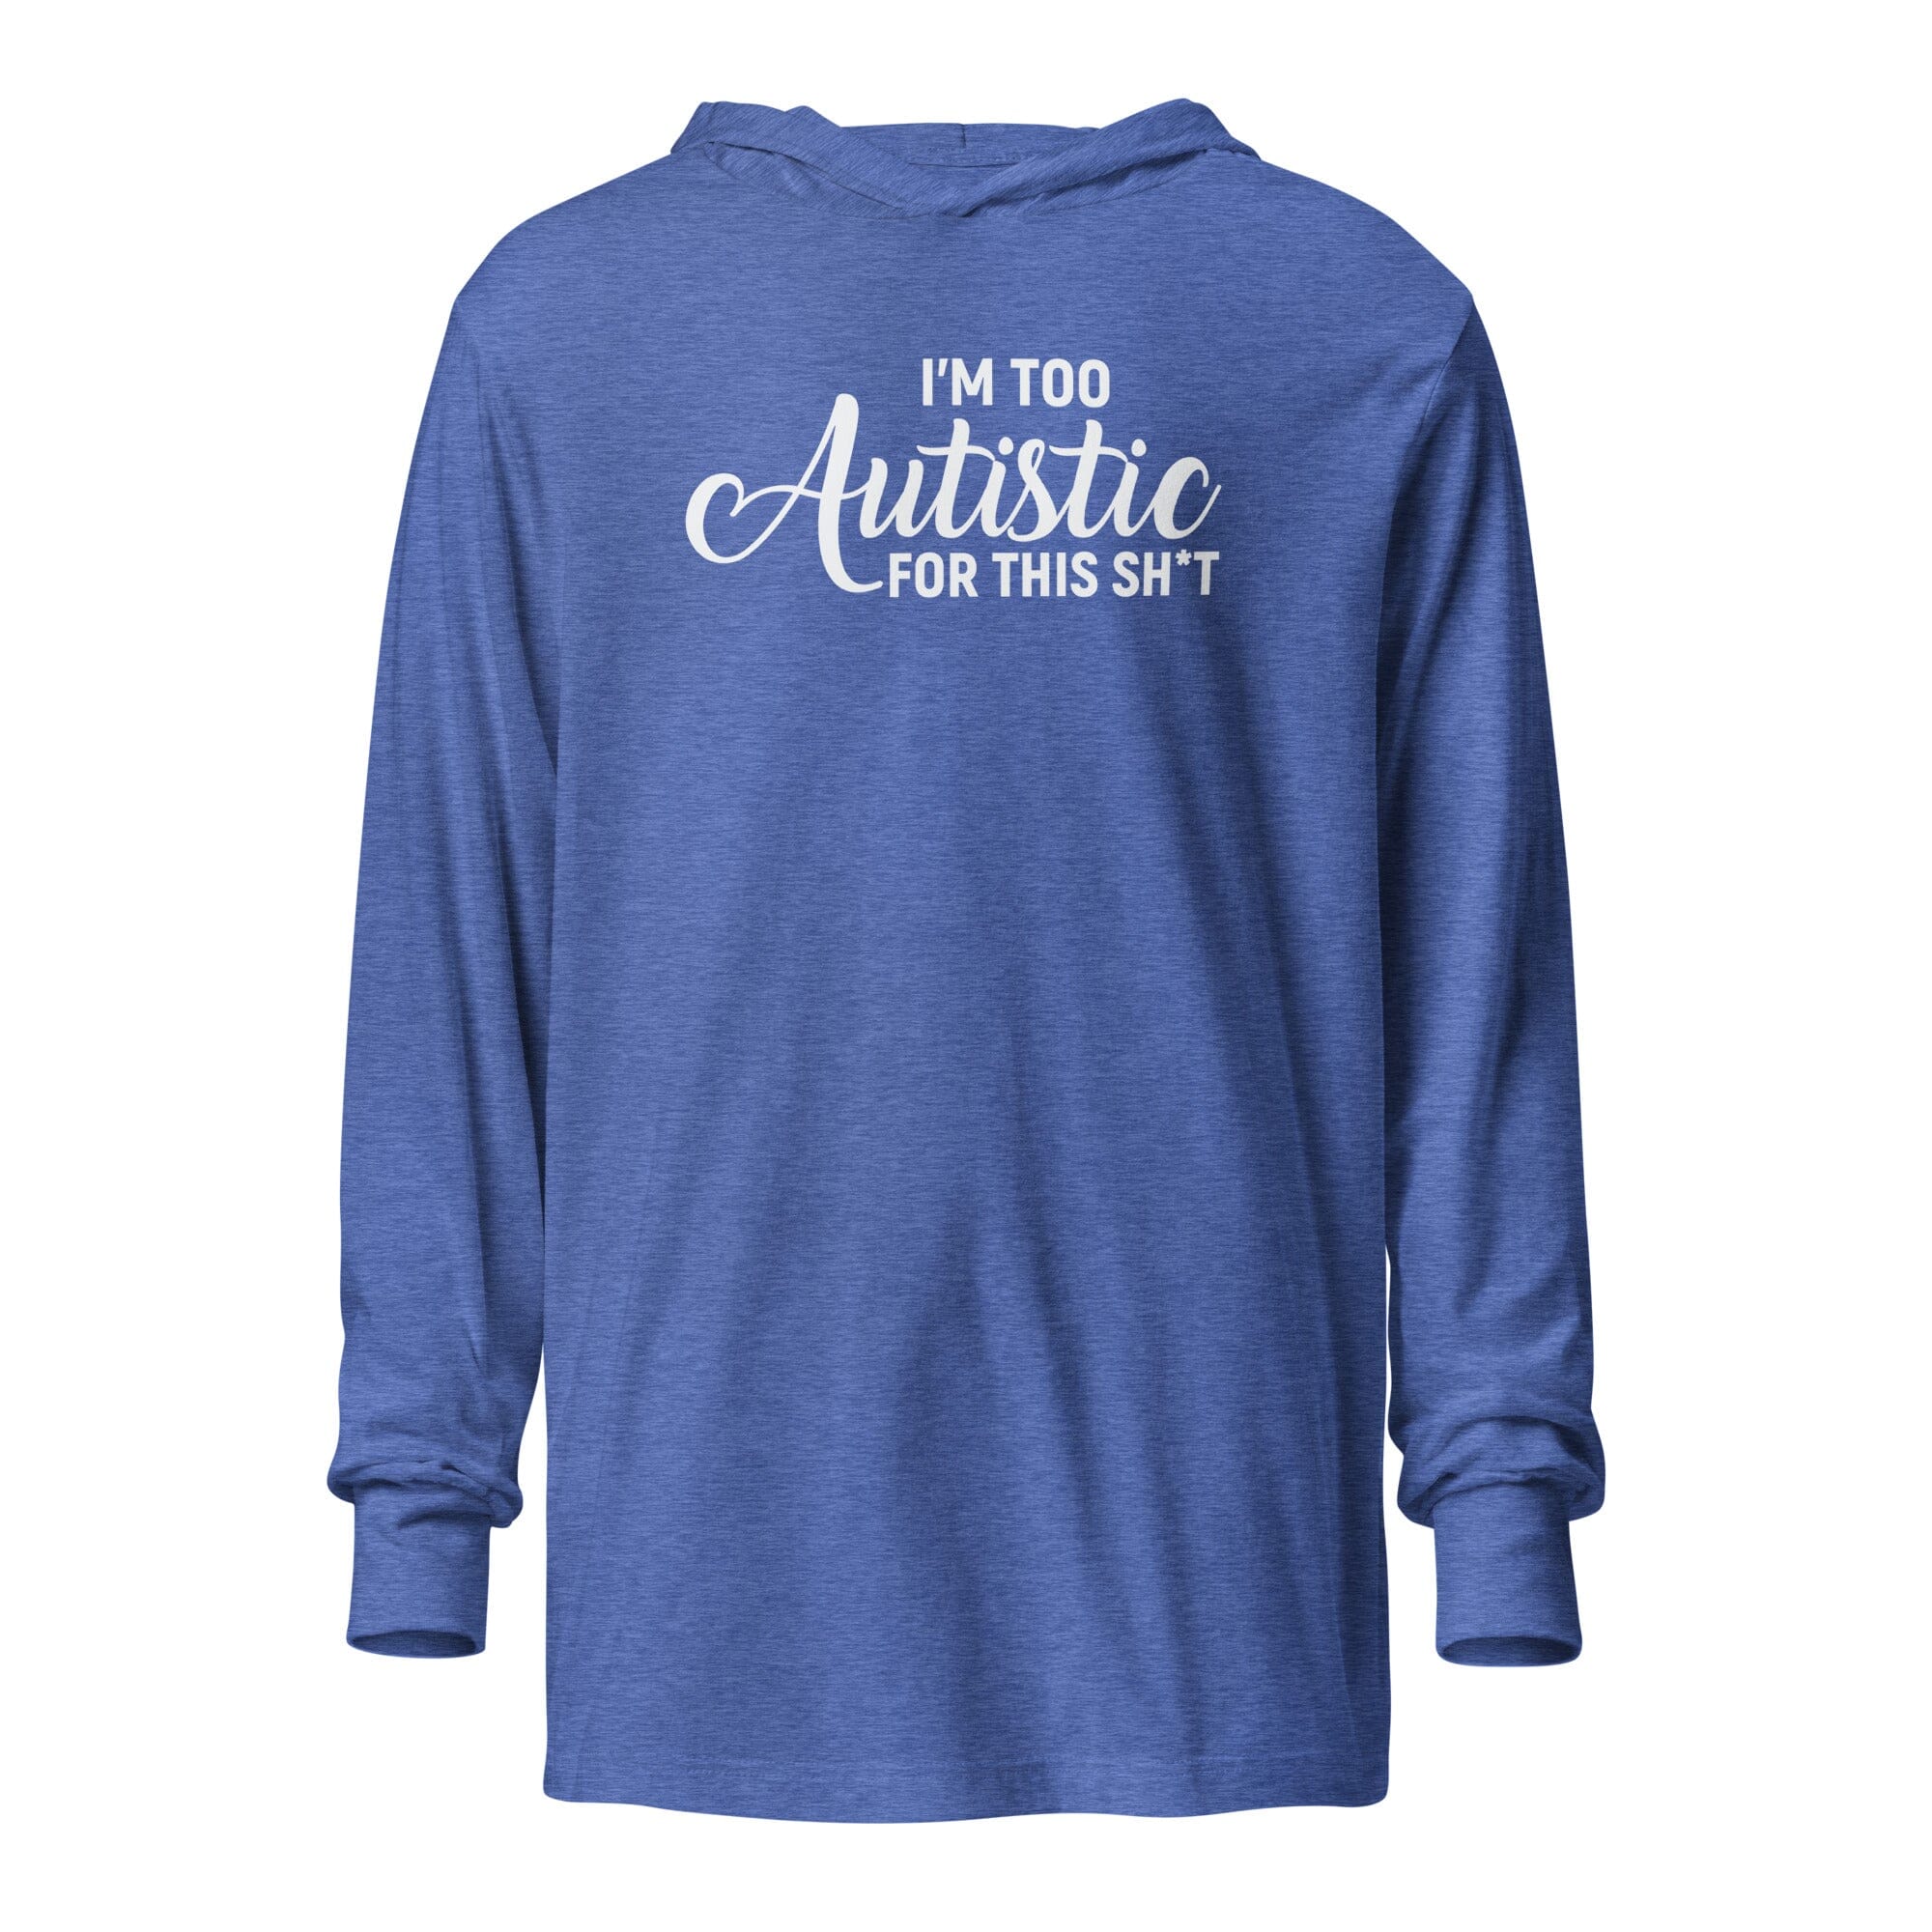 I'm Too Autistic for This Sh*t Hooded long-sleeve tee The Autistic Innovator Heather True Royal XS 